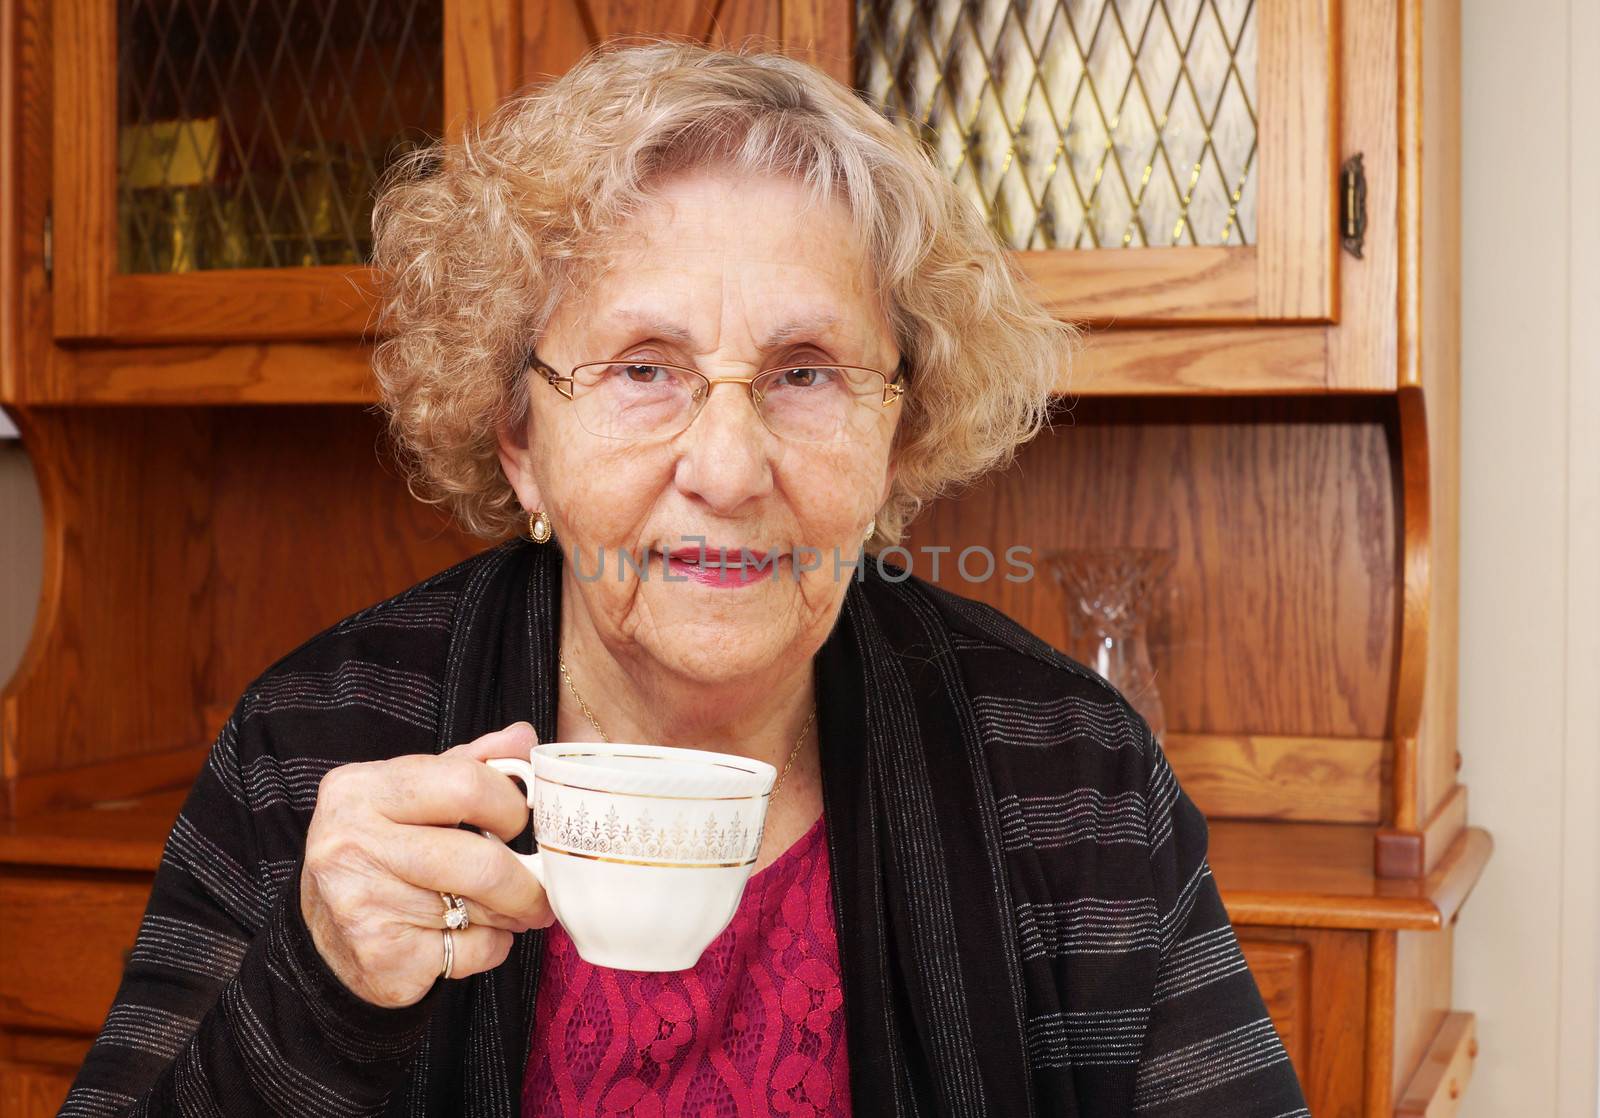 Seinor woman with cup of tea by Mirage3